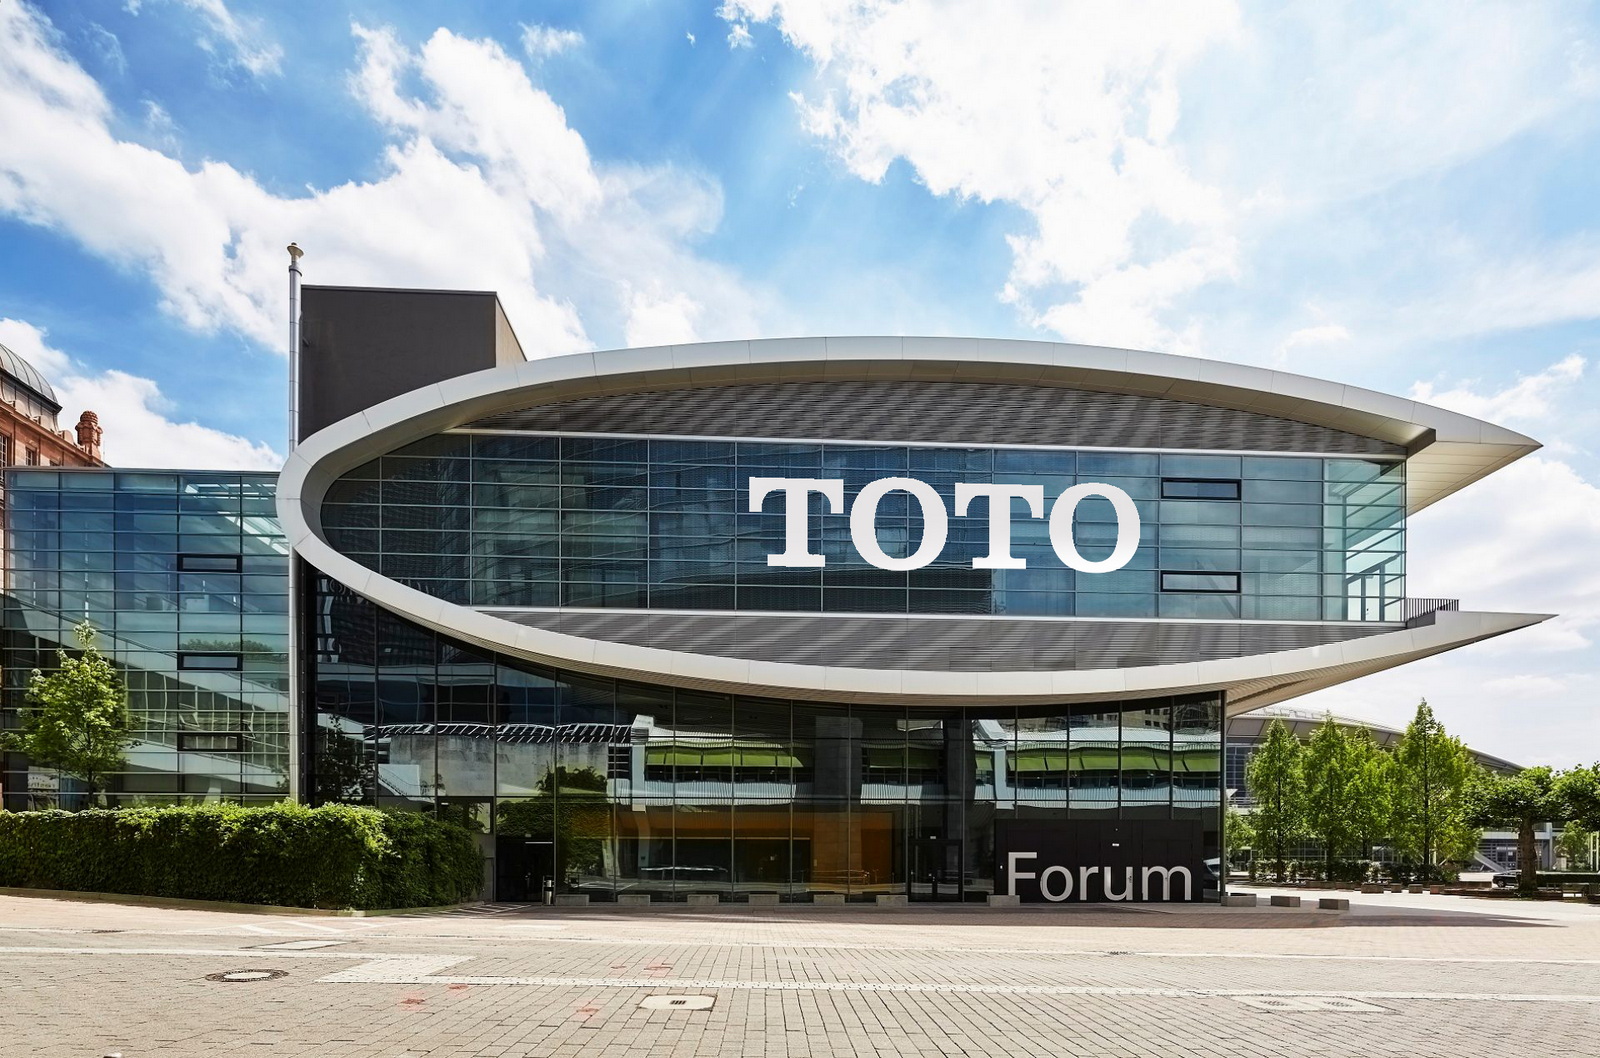 1. FORUM building with TOTO logo